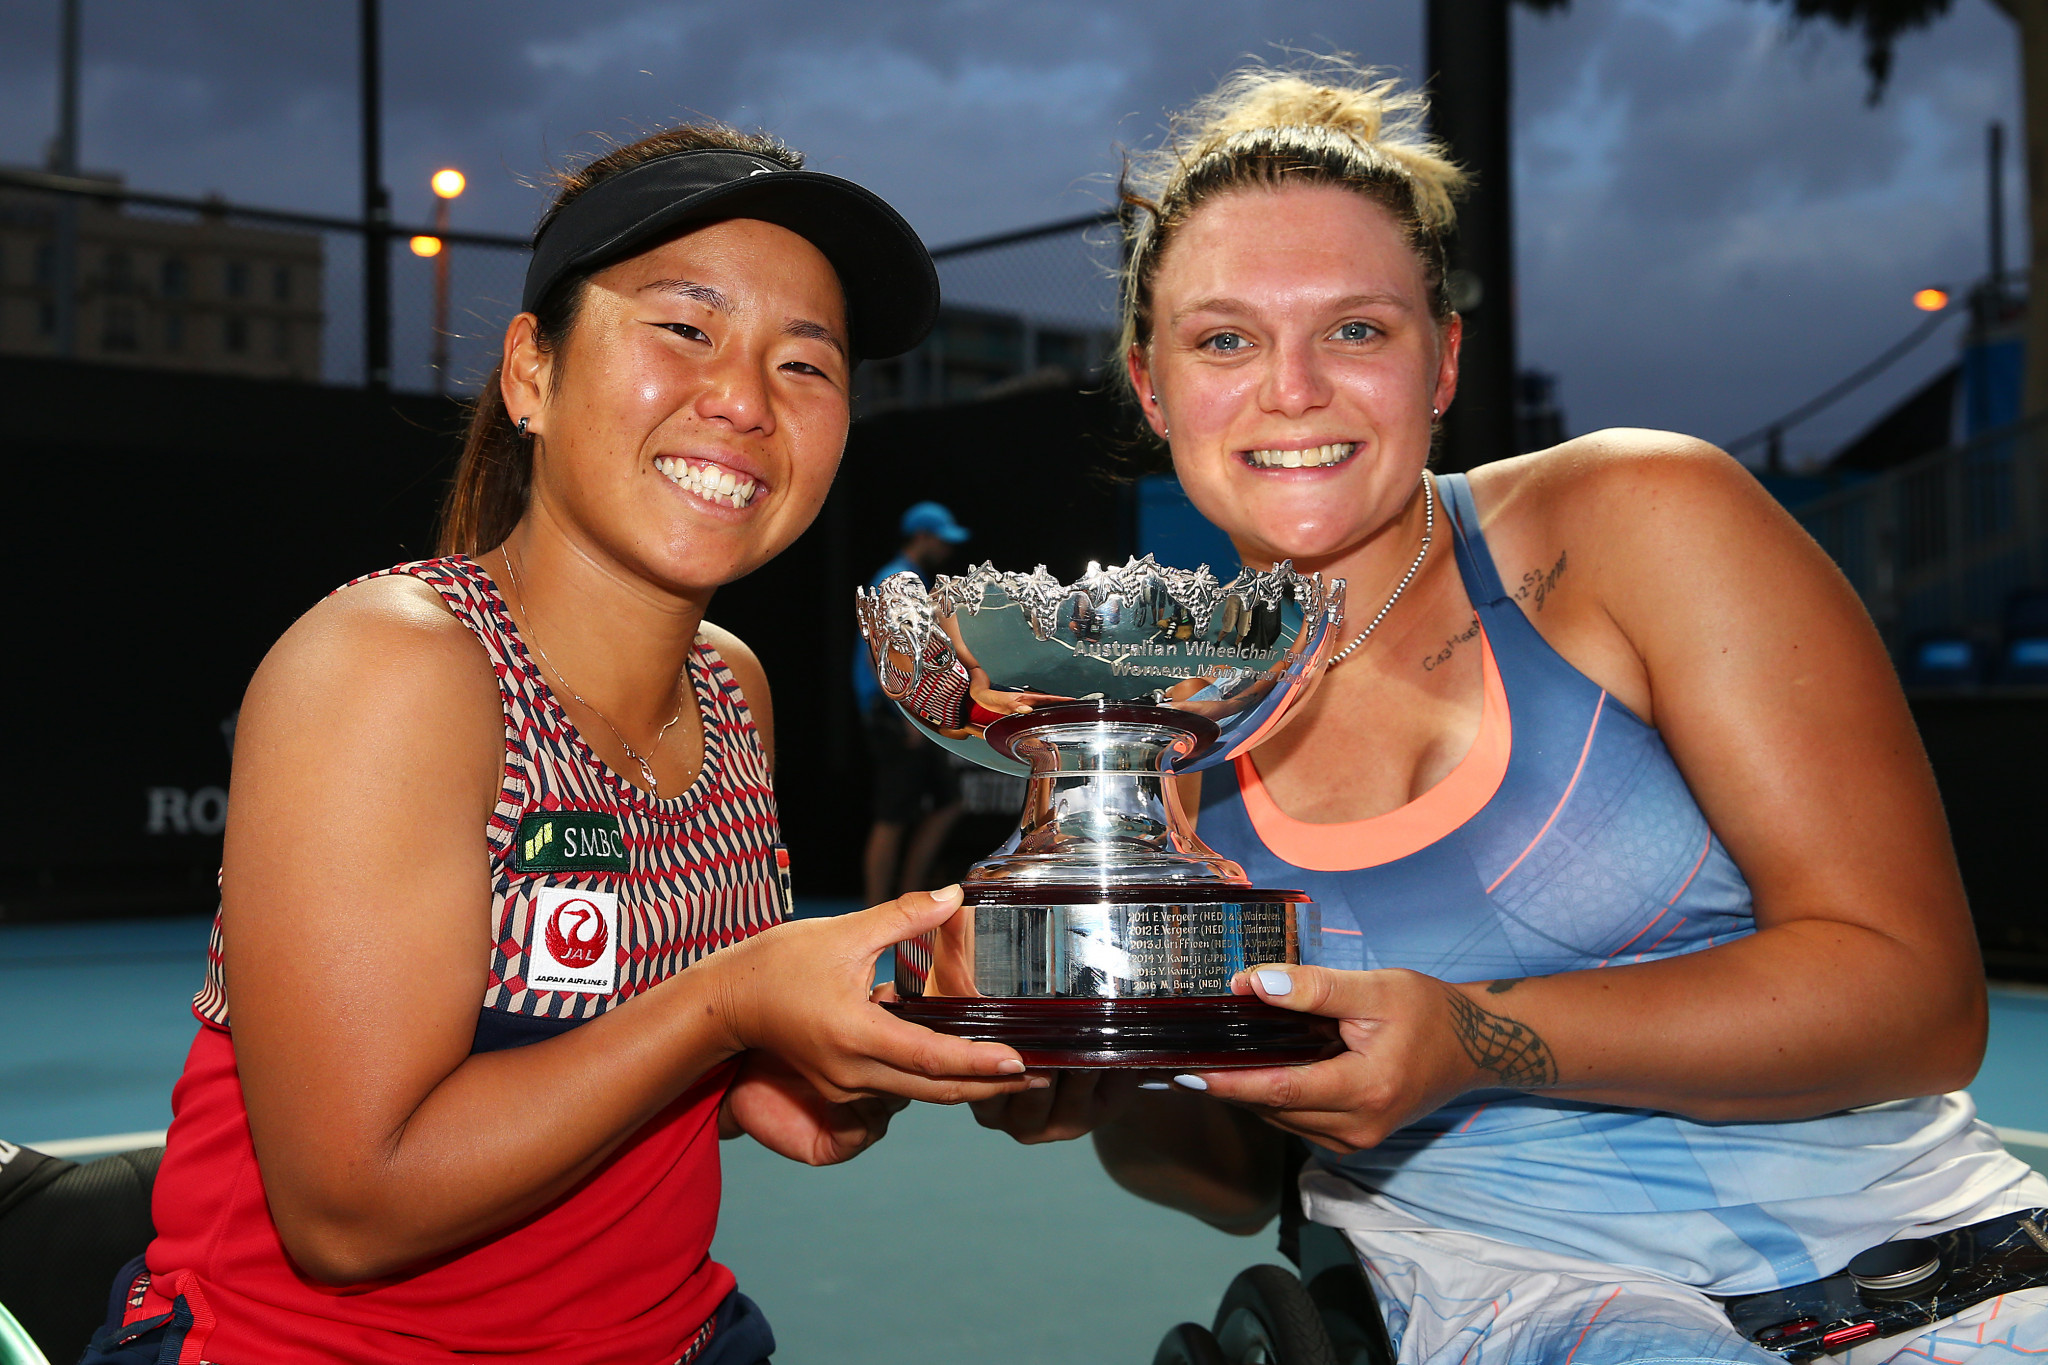 Whiley started 2020 well with an Australian Open doubles win with Japan's Yui Kamiji ©Getty Images